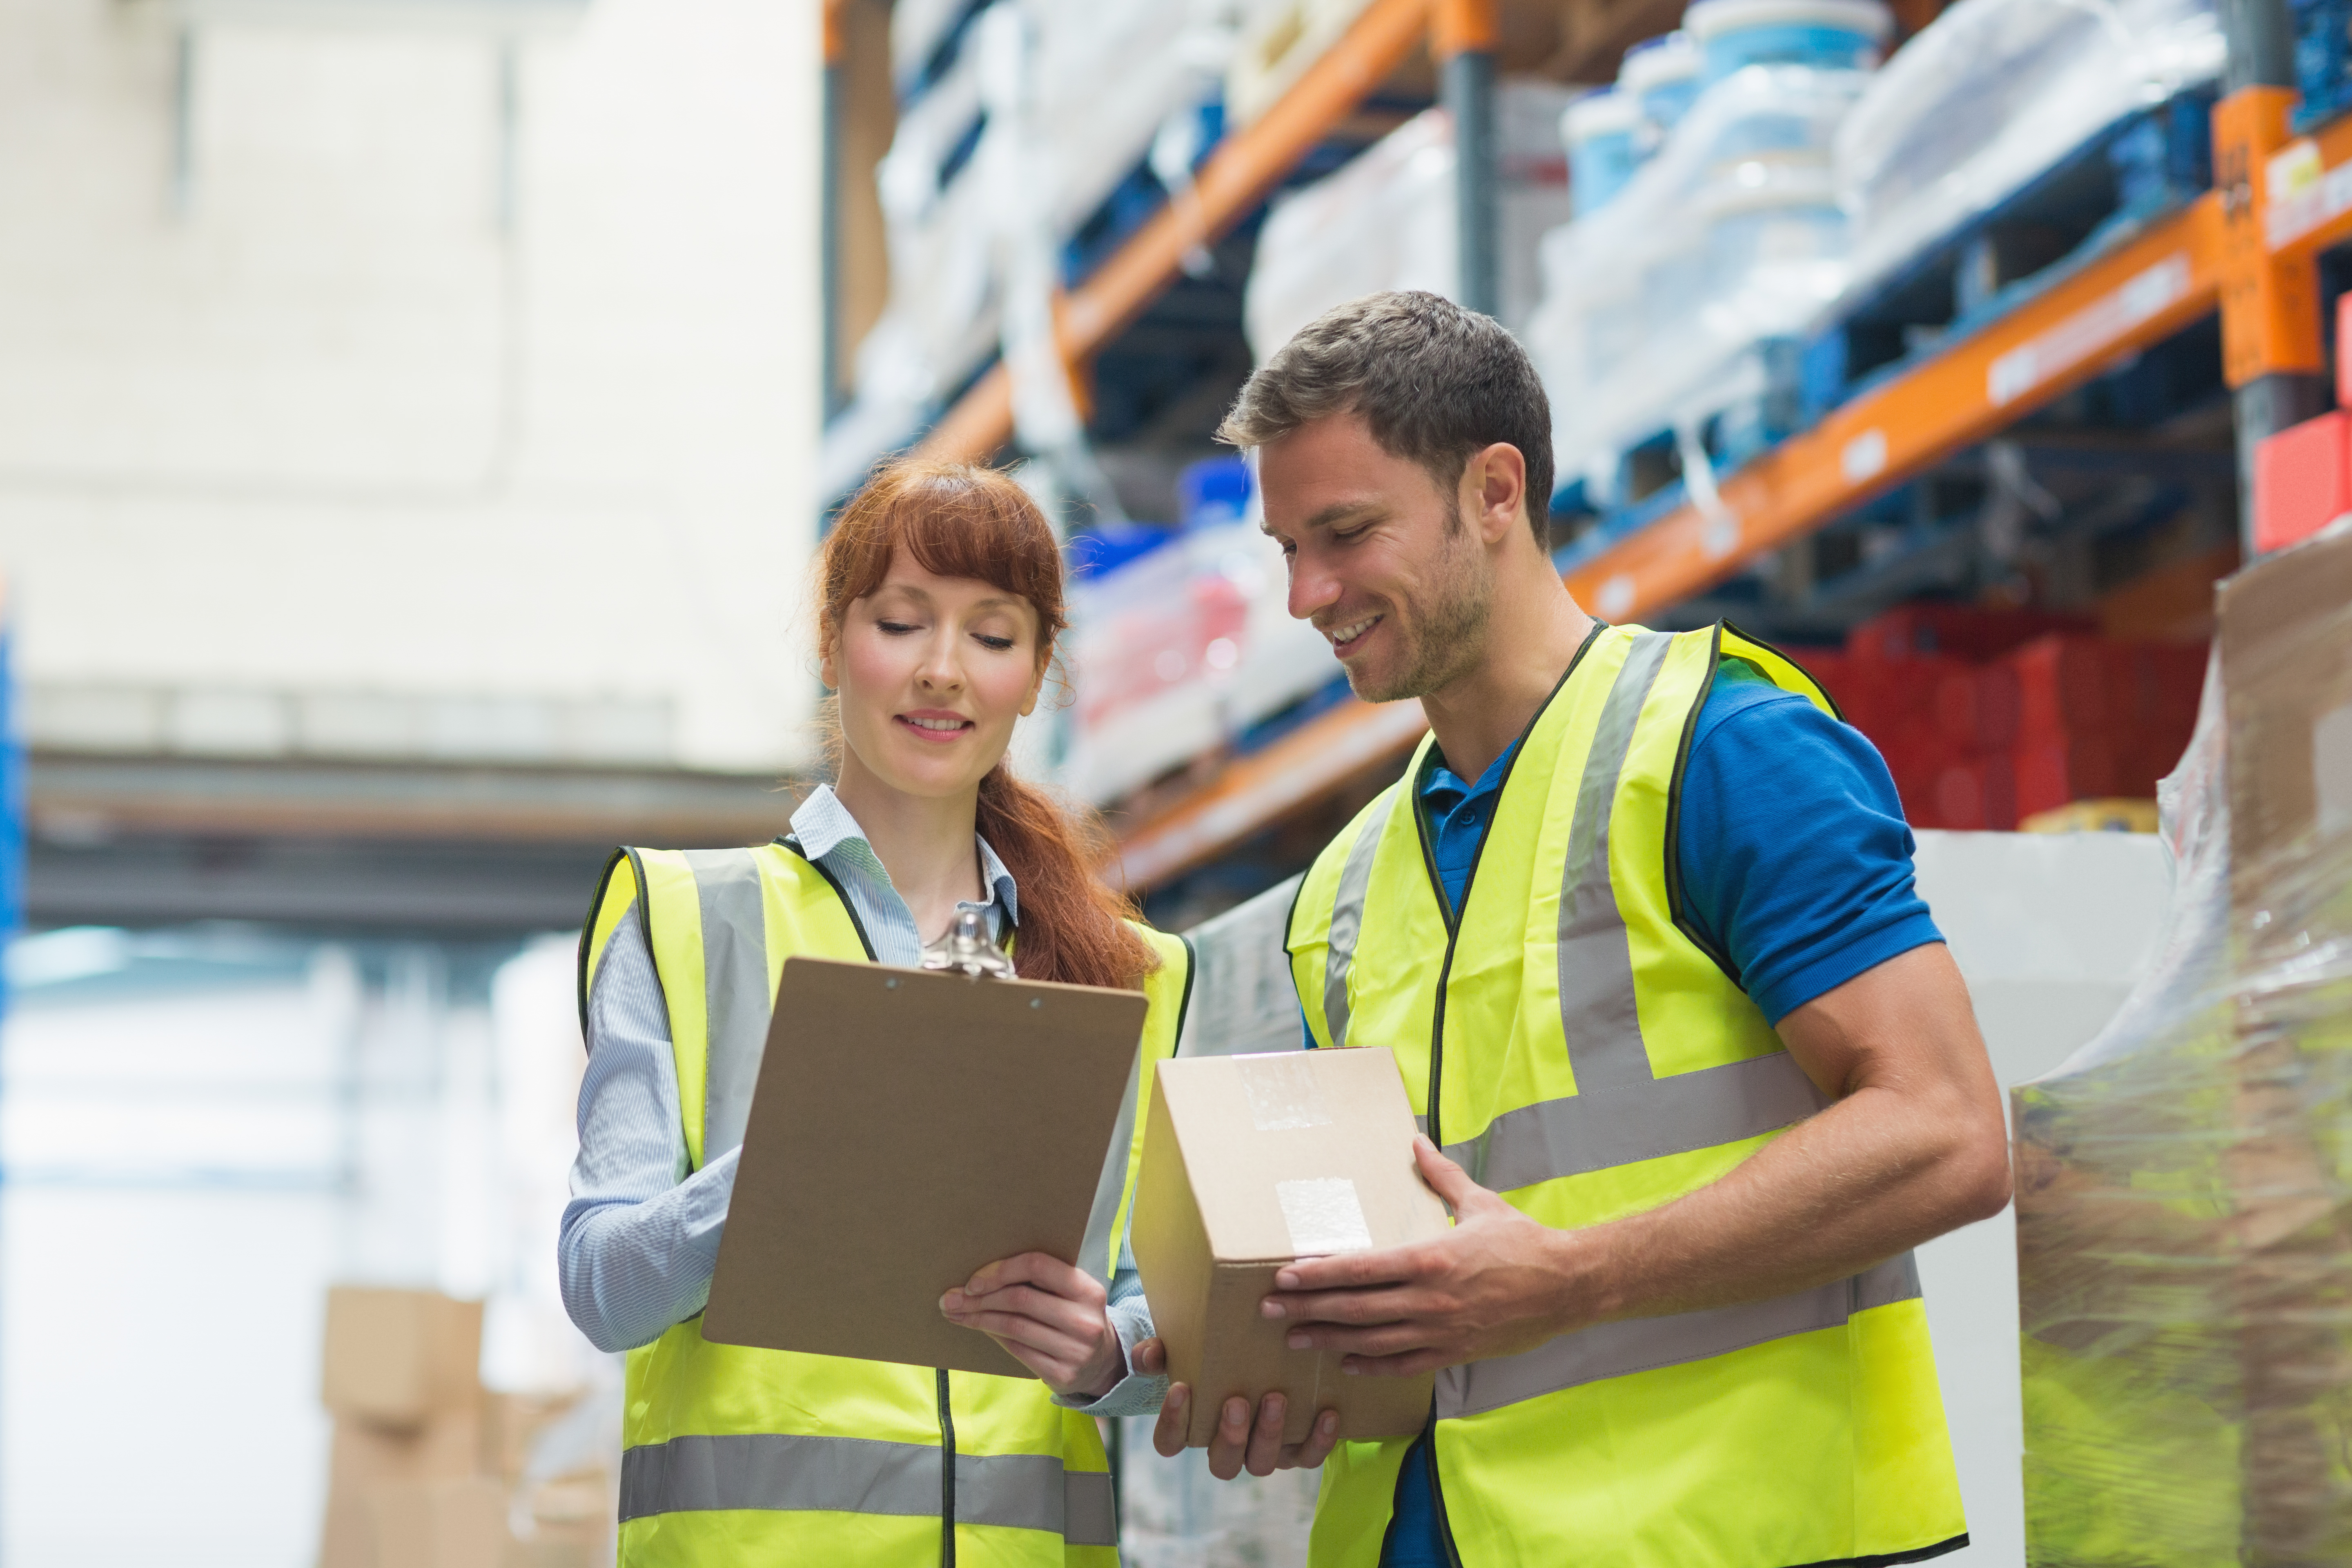 4 Warehouse Sustainability Ideas for Every Industry